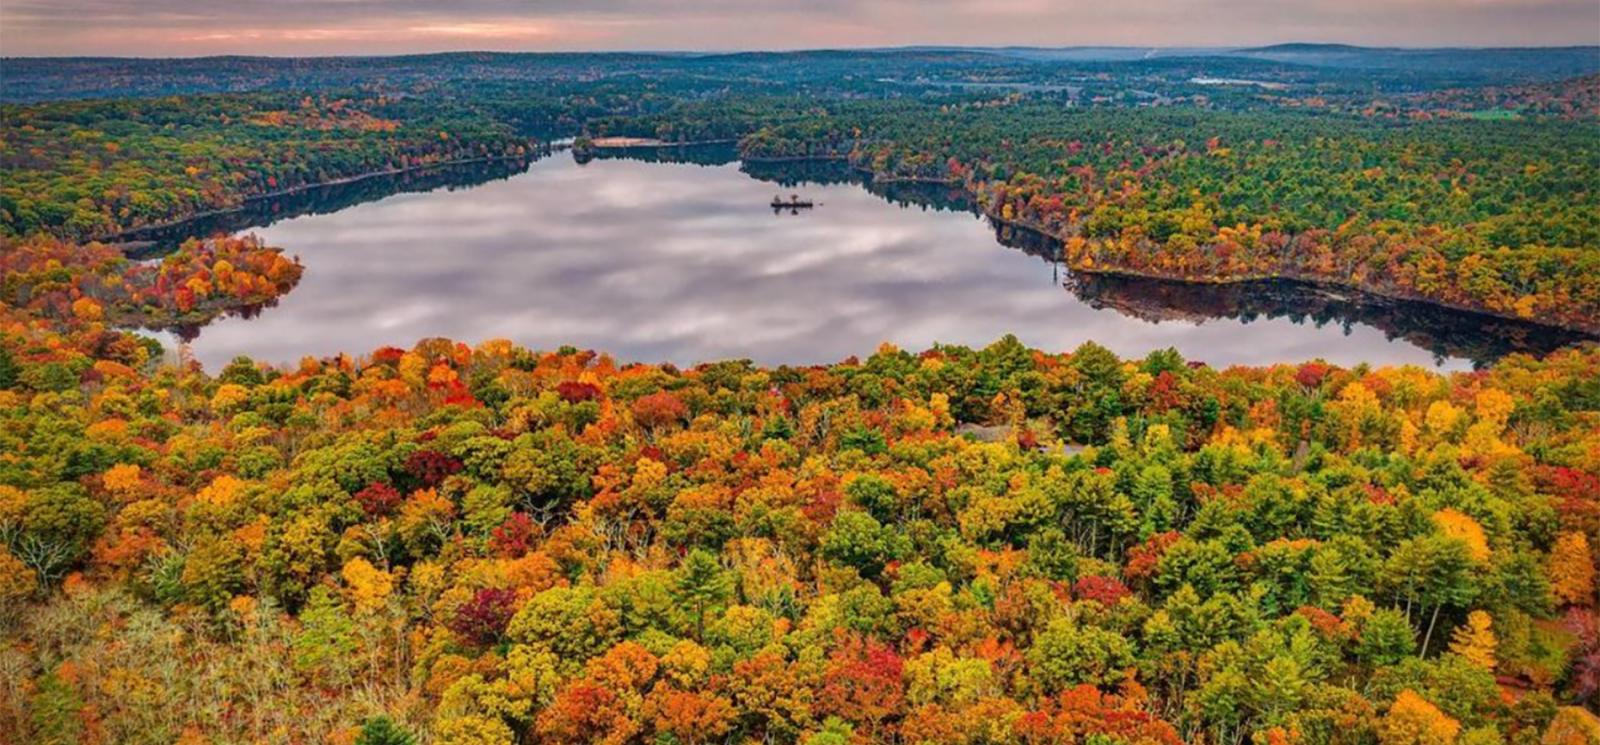 An aerial view of fall trees and lake (Instagram@miltonlevin)